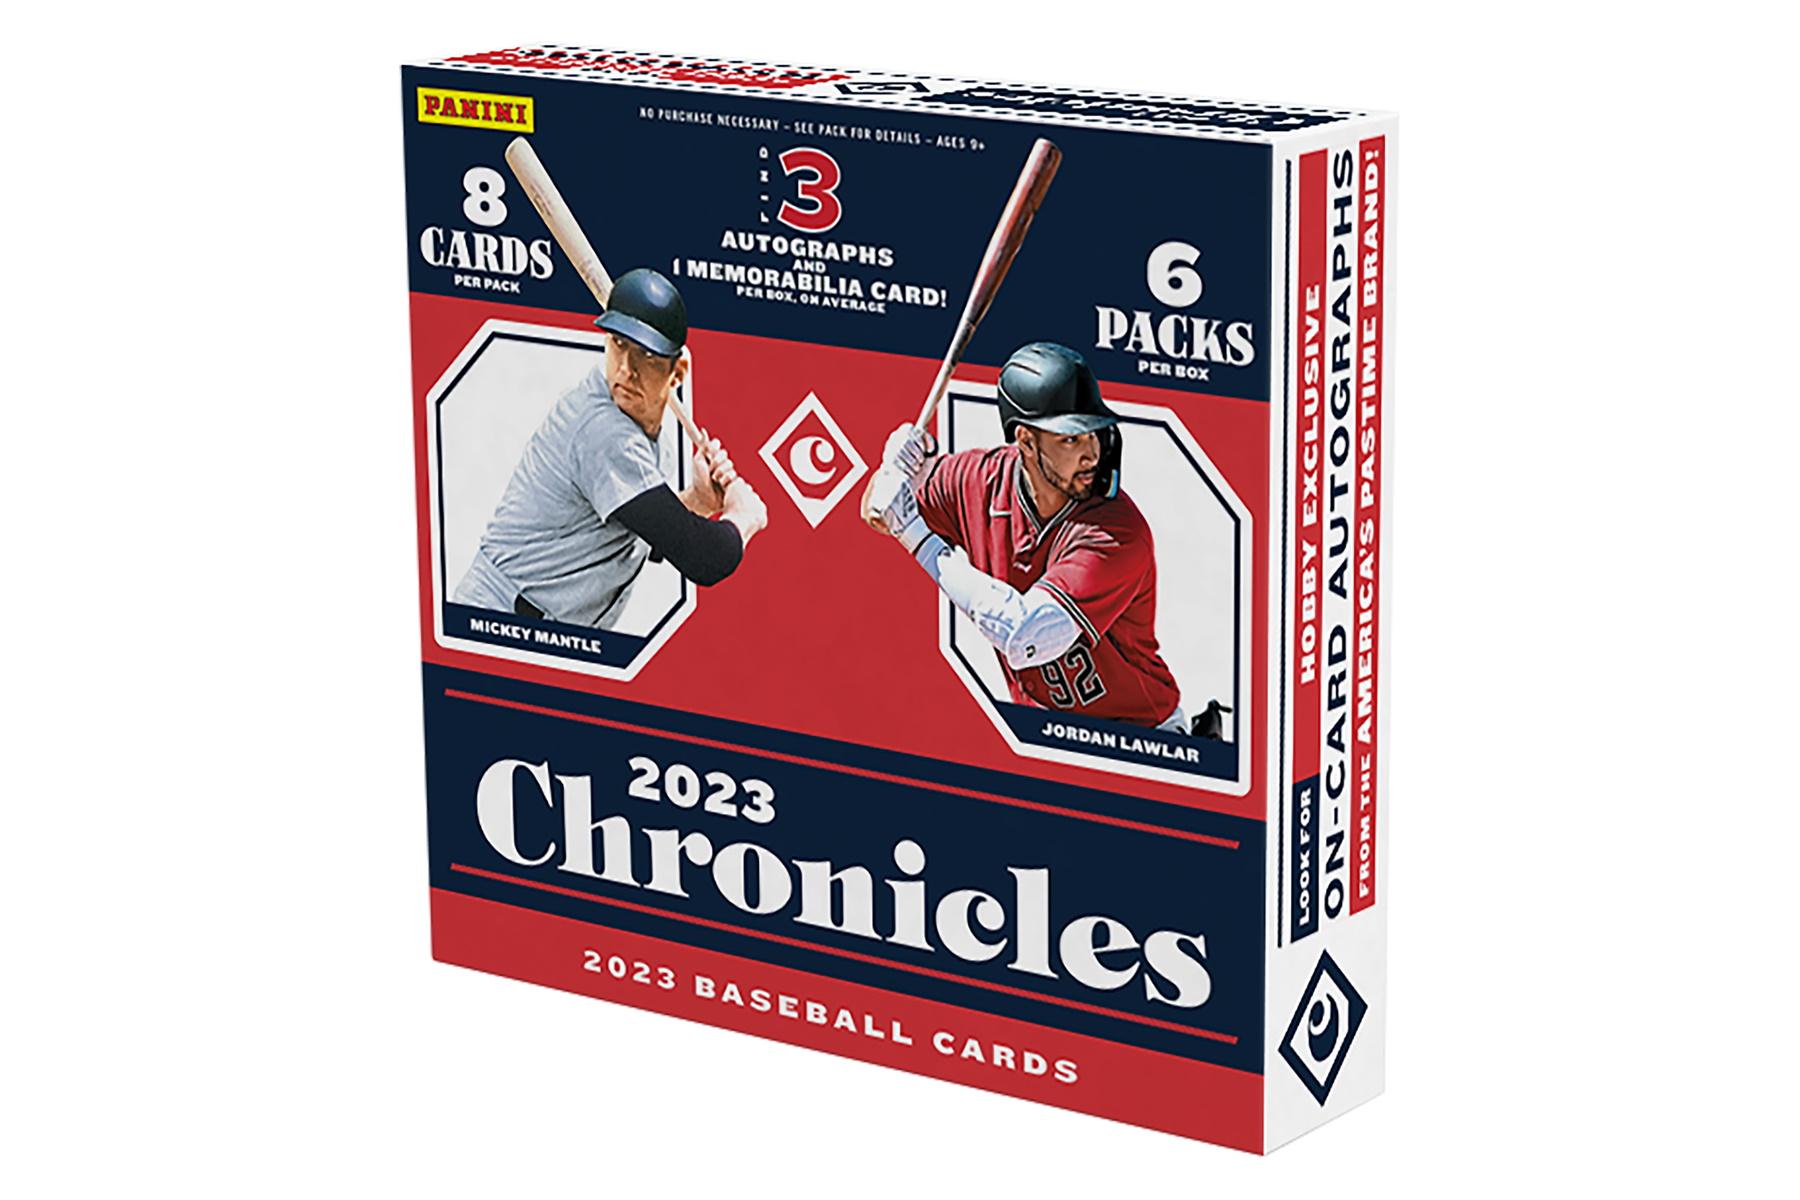 2020 Panini Chronicles Baseball Checklist, Set Info, Boxes, Release Date